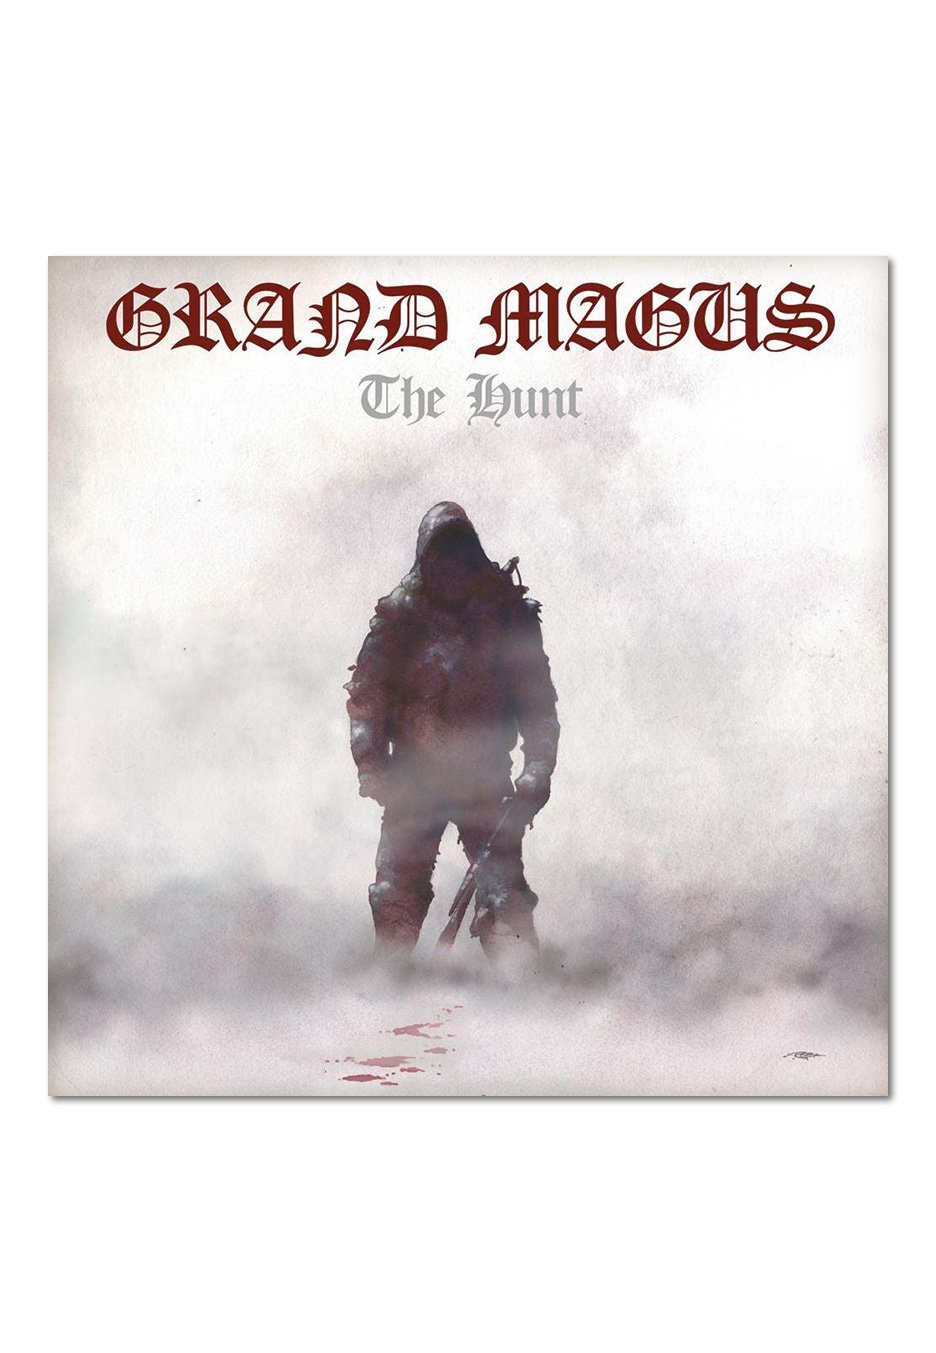 Grand Magus - The Hunt - CD